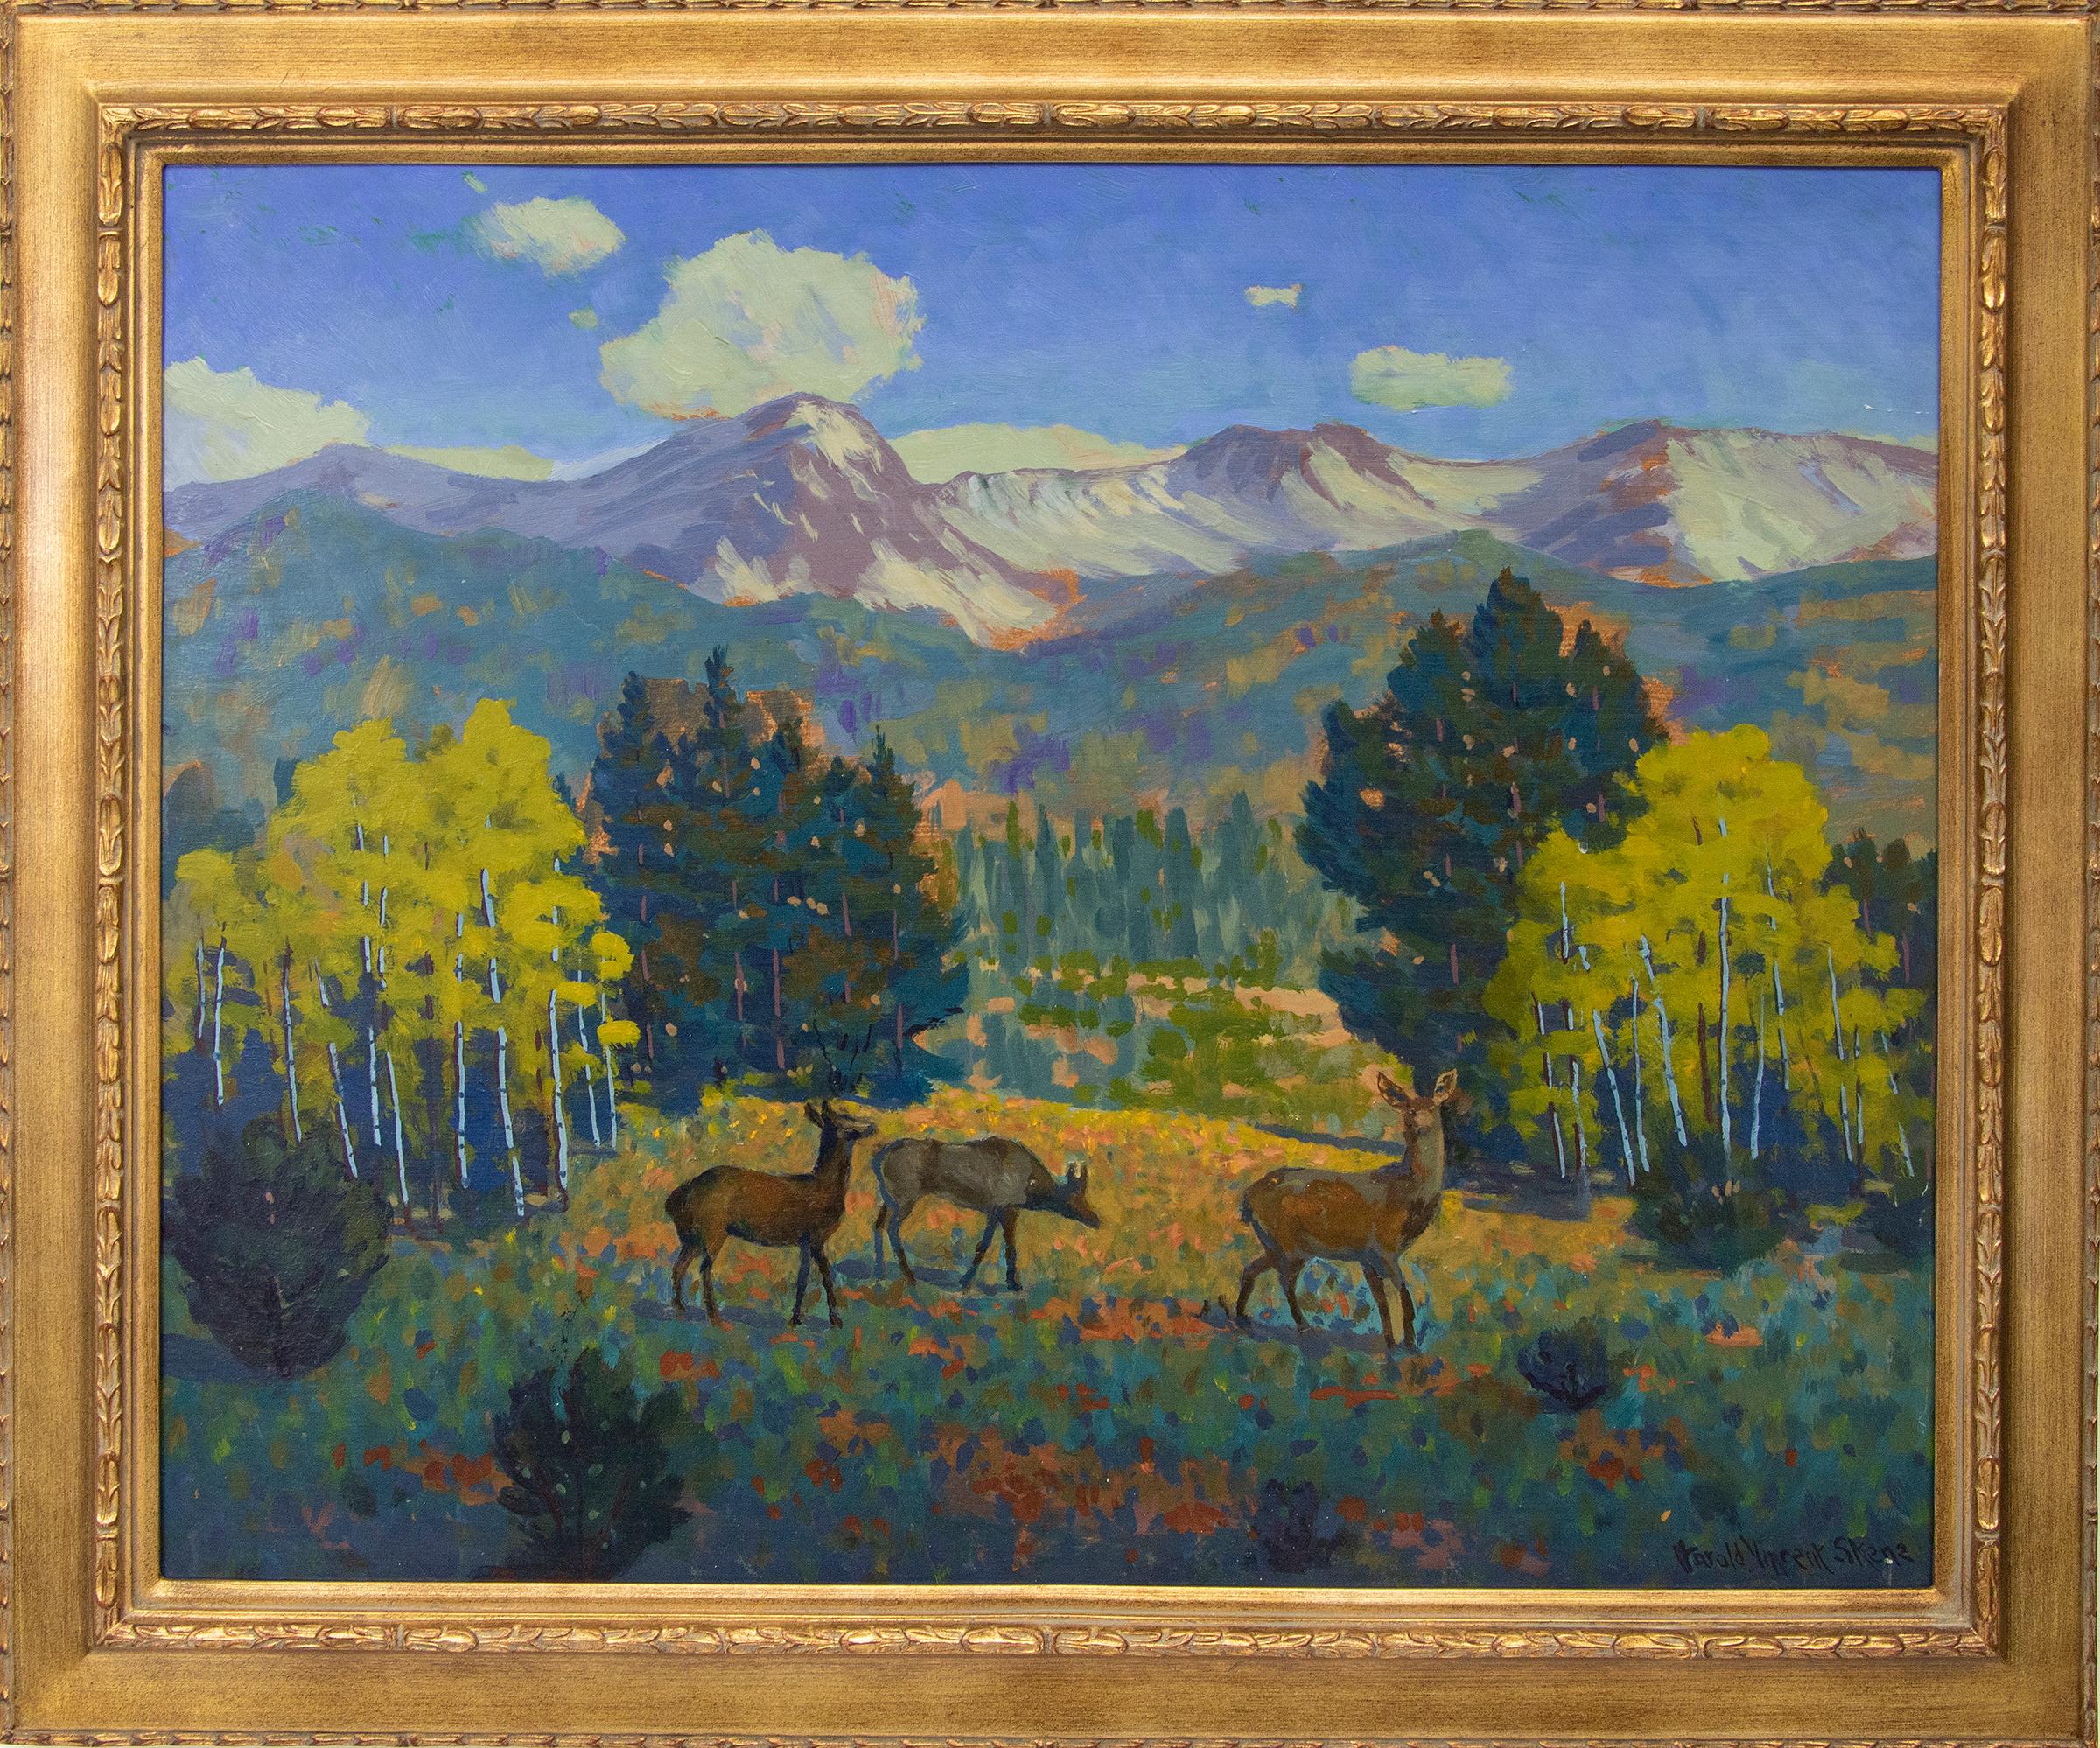 Harold Vincent Skene Animal Painting - 'Threesome' - 1960s Vintage Mountain Landscape Painting, Deer in Yellowstone